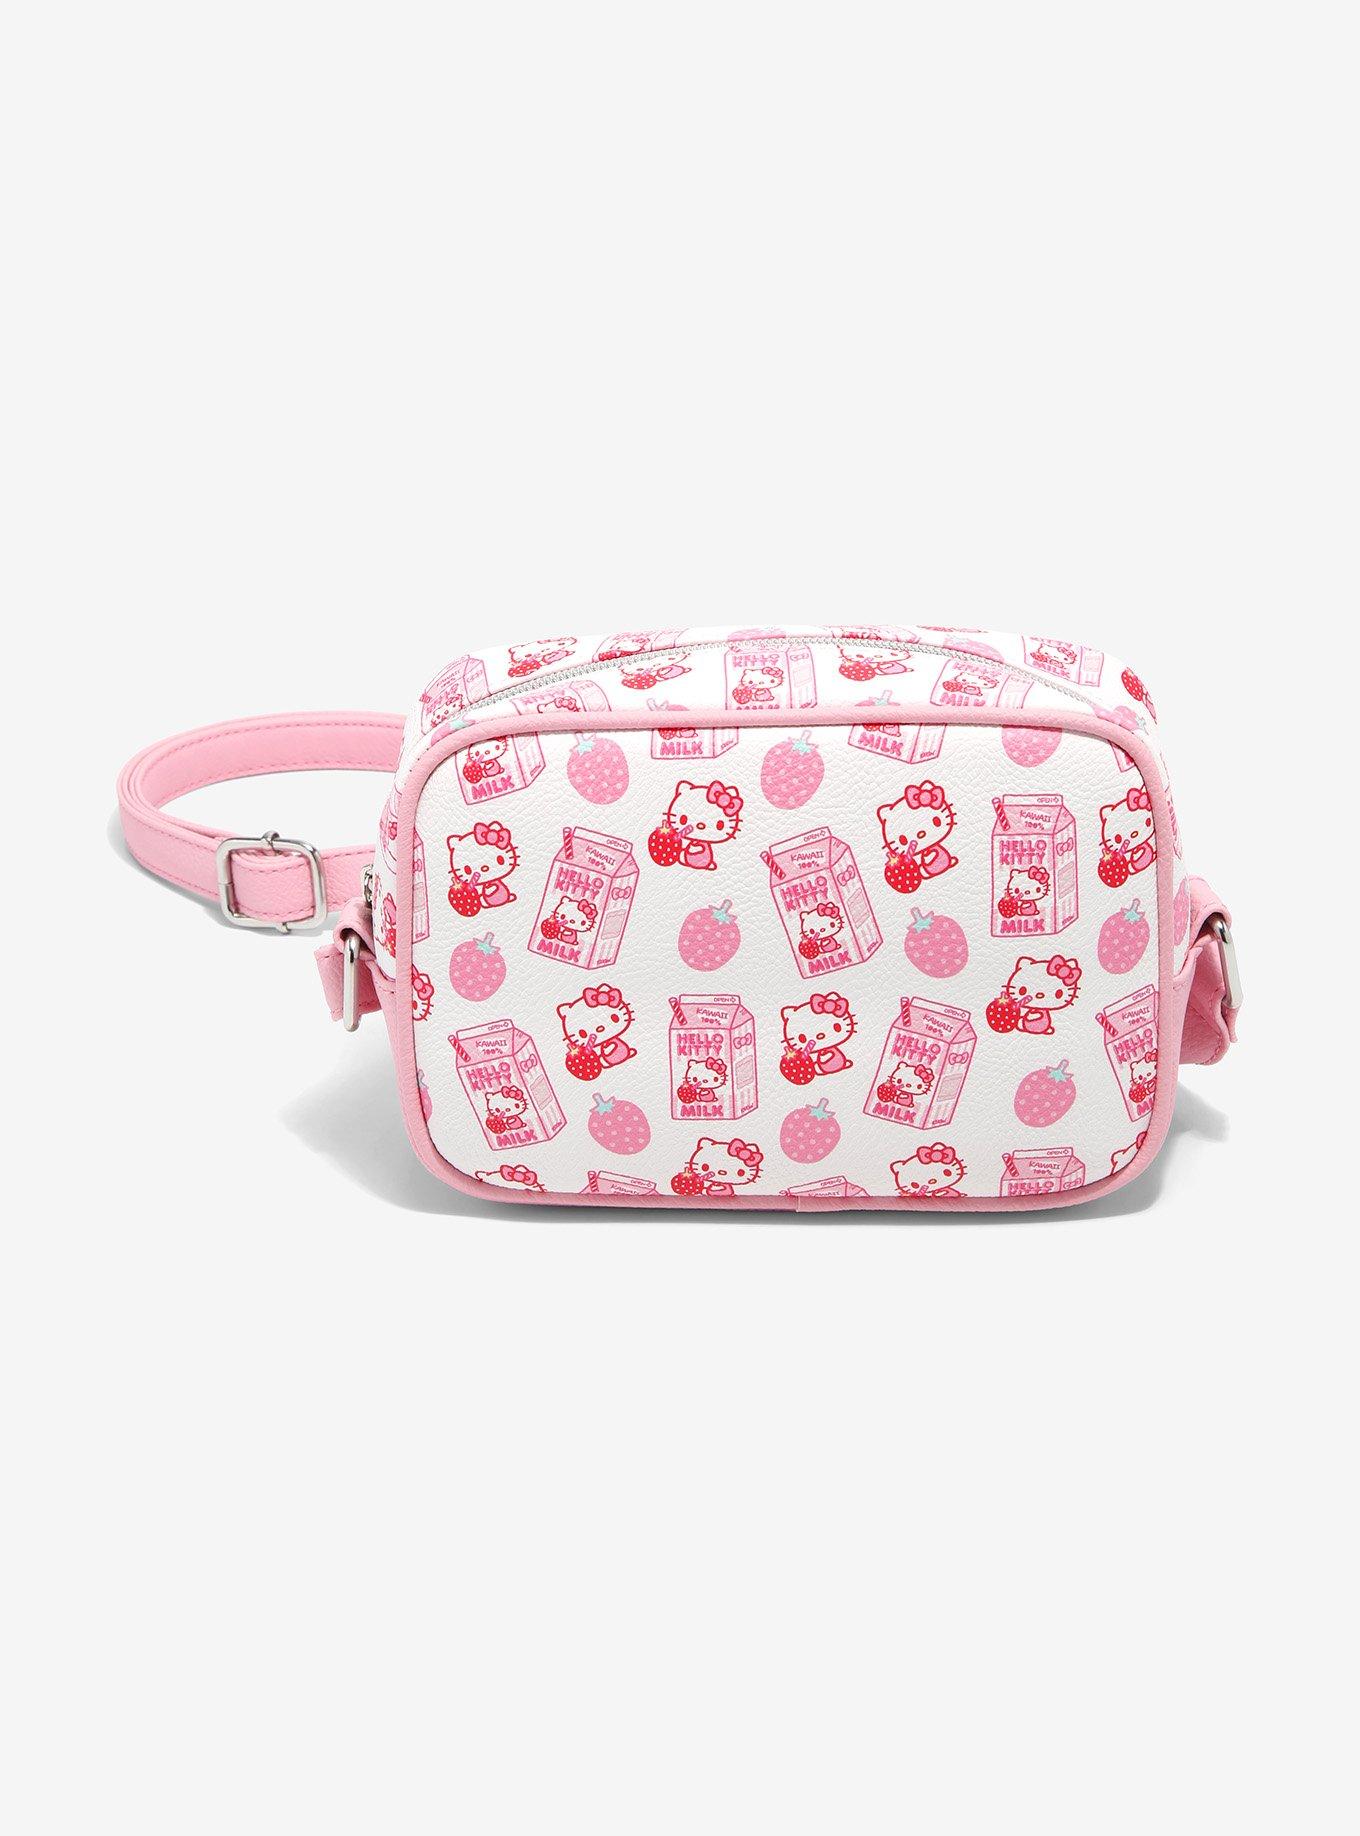 Hello Kitty, Bags, Super Cute Hello Kitty Strawberries Handshoulderbody  Bag With Zipper